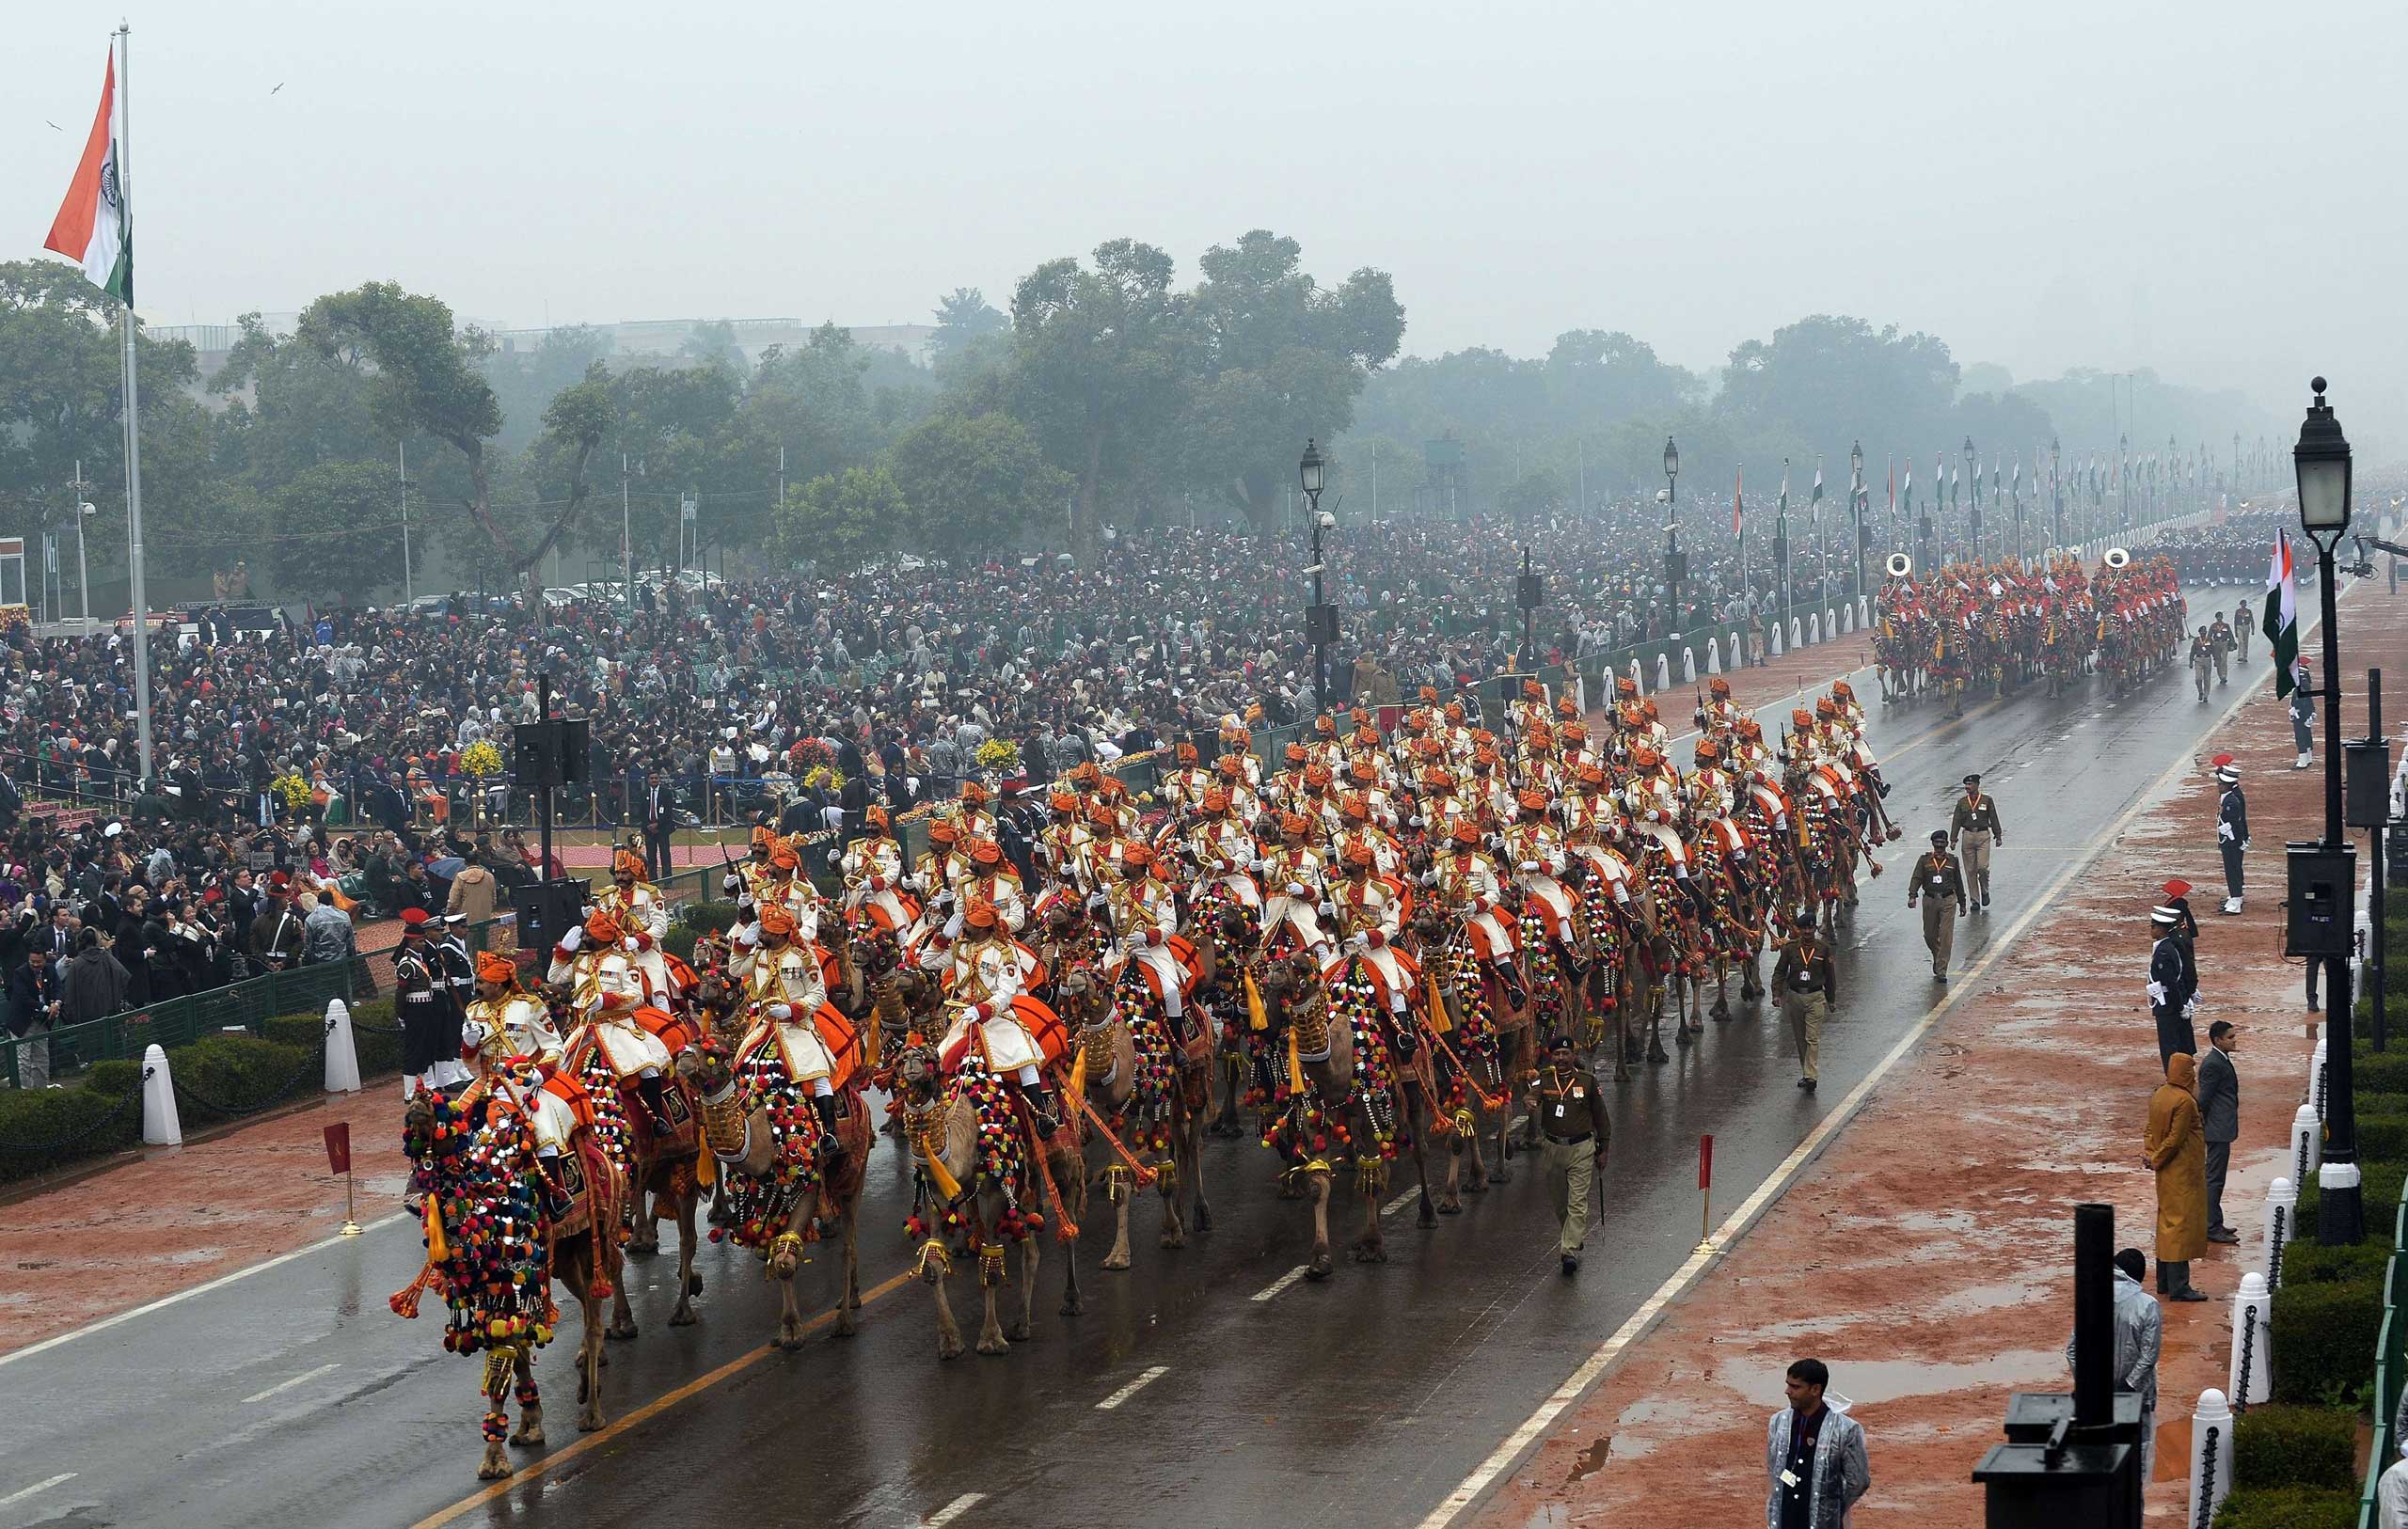 Soldiers march in formation down the ceremonial boulevard Rajpath during the Republic Day parade in New Delhi on Jan. 26, 2015. (Prakash Singh—AFP/Getty Images)